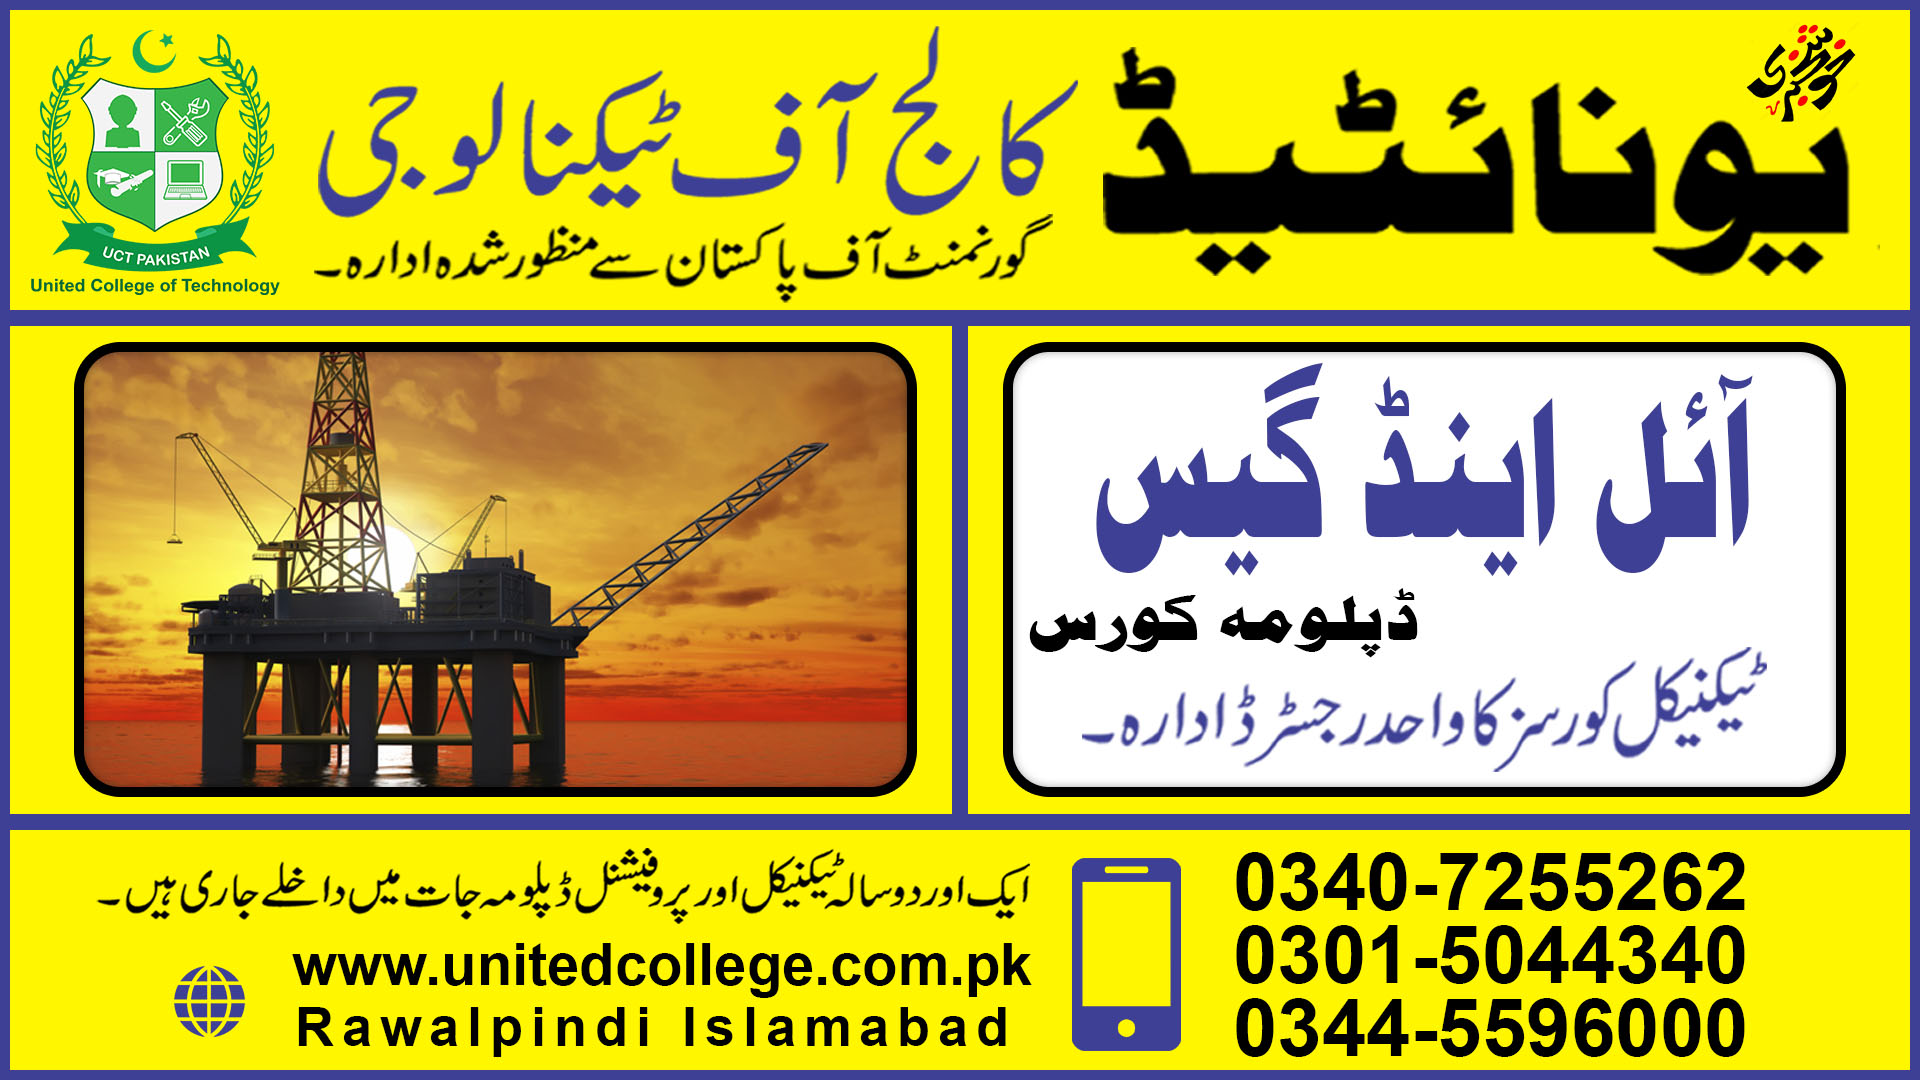 OIL AND GAS COURSE